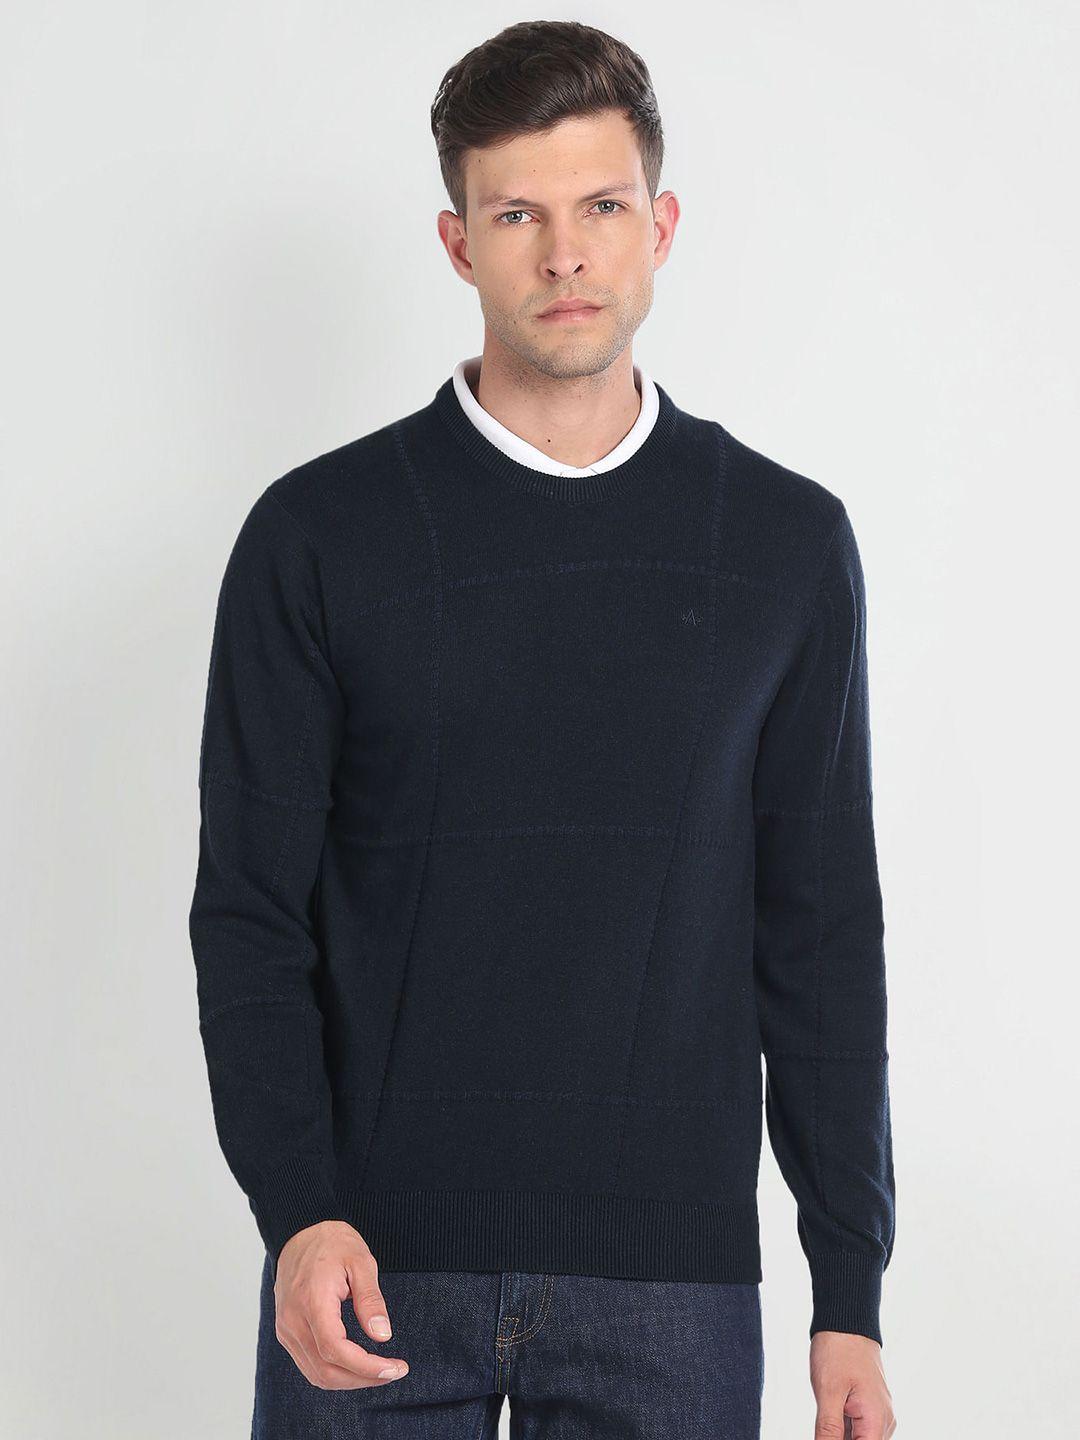 arrow-cable-knit-round-neck-long-sleeves-pullover-sweater